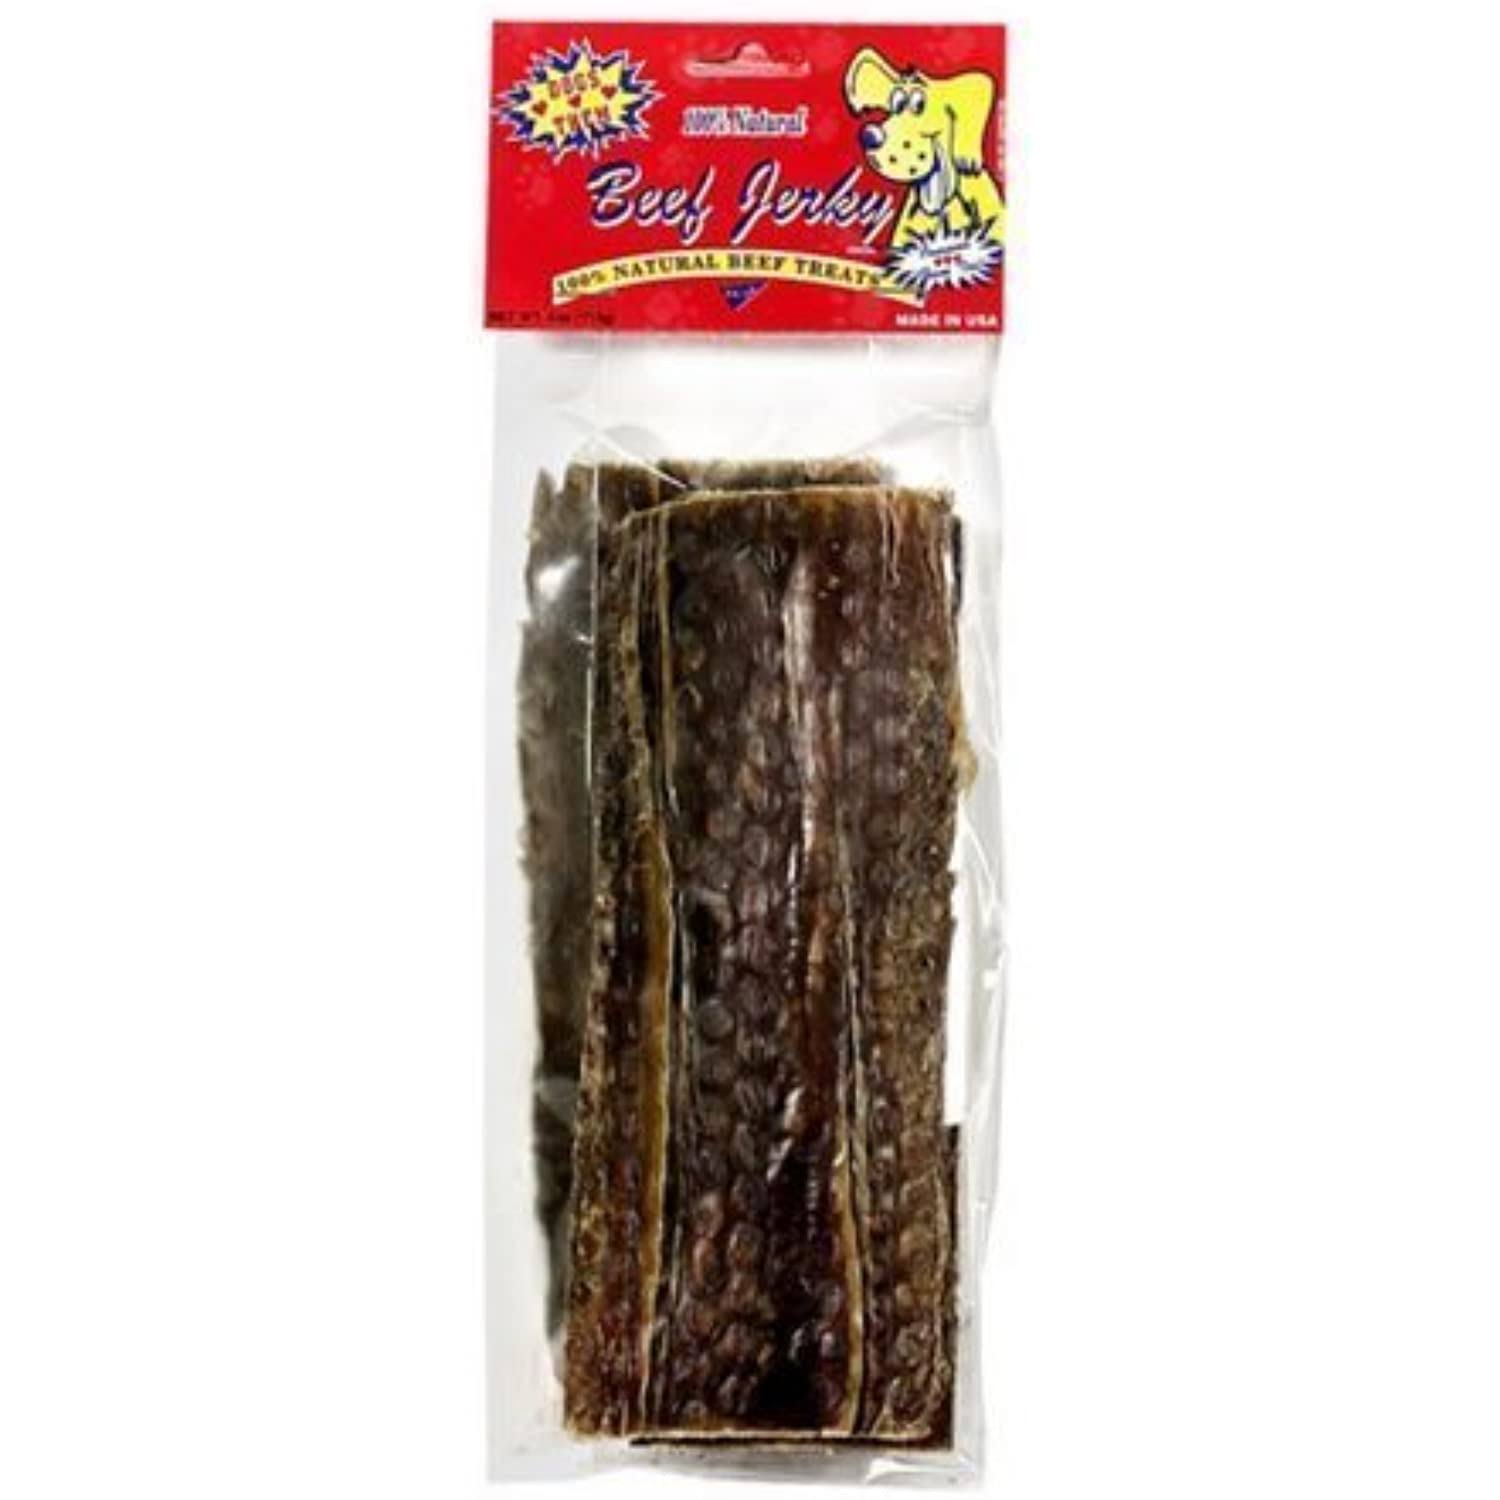 Pet Center Beef Jerky for Dogs - 4 oz packet